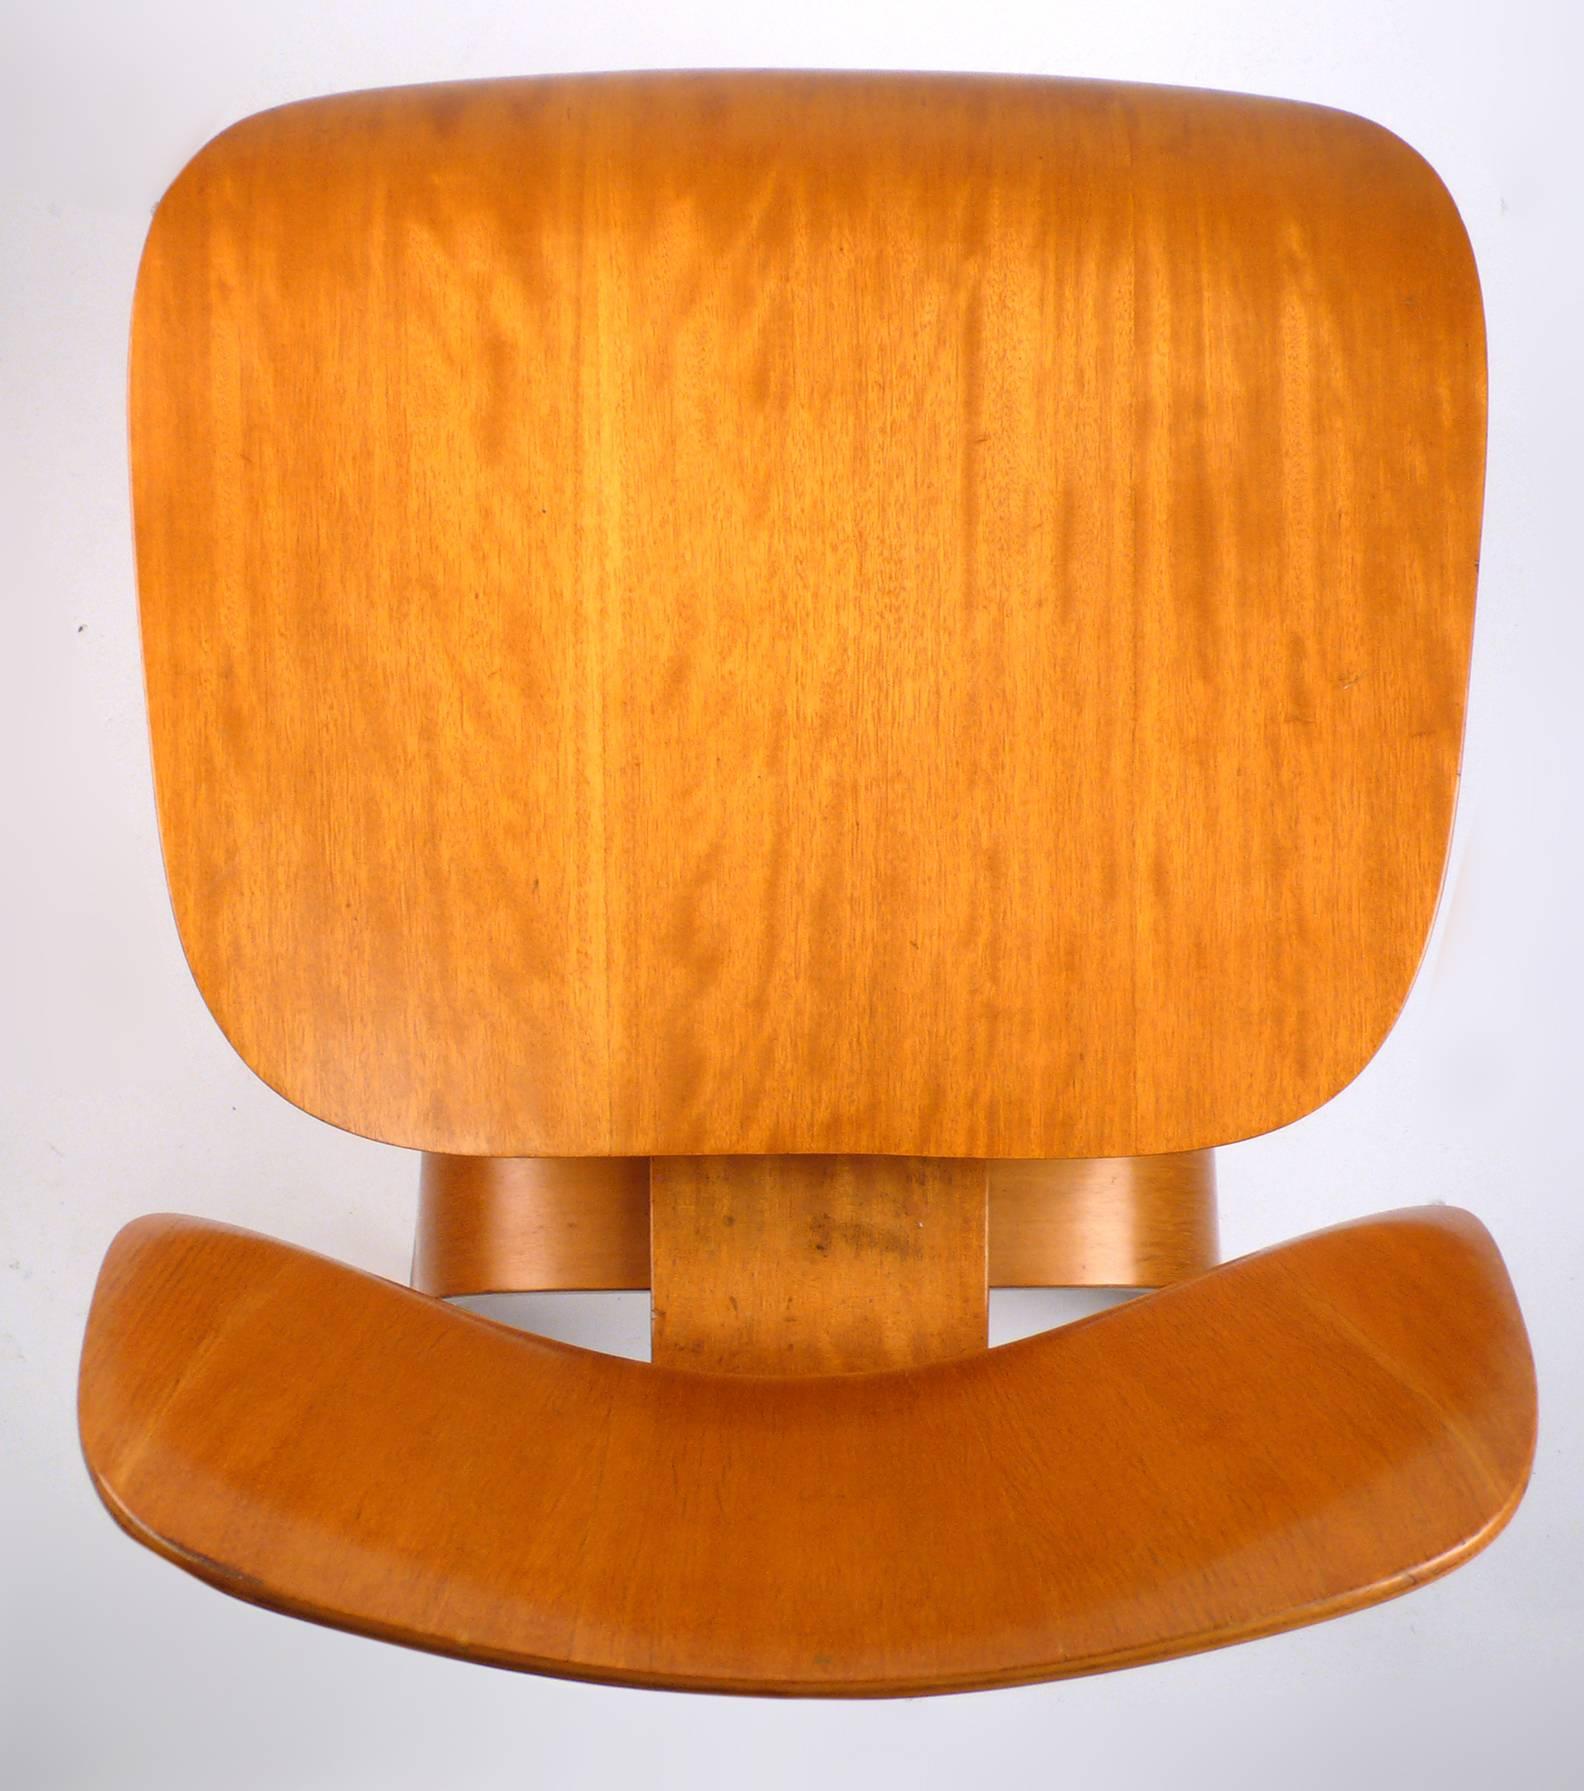 This is an excellent early example DCW Molded Plywood Chair designed by Charles Eames manufactured by Evans. Chair is in good condition and retains the early Evans/Eames/Herman Miller paper label, seat height 18".